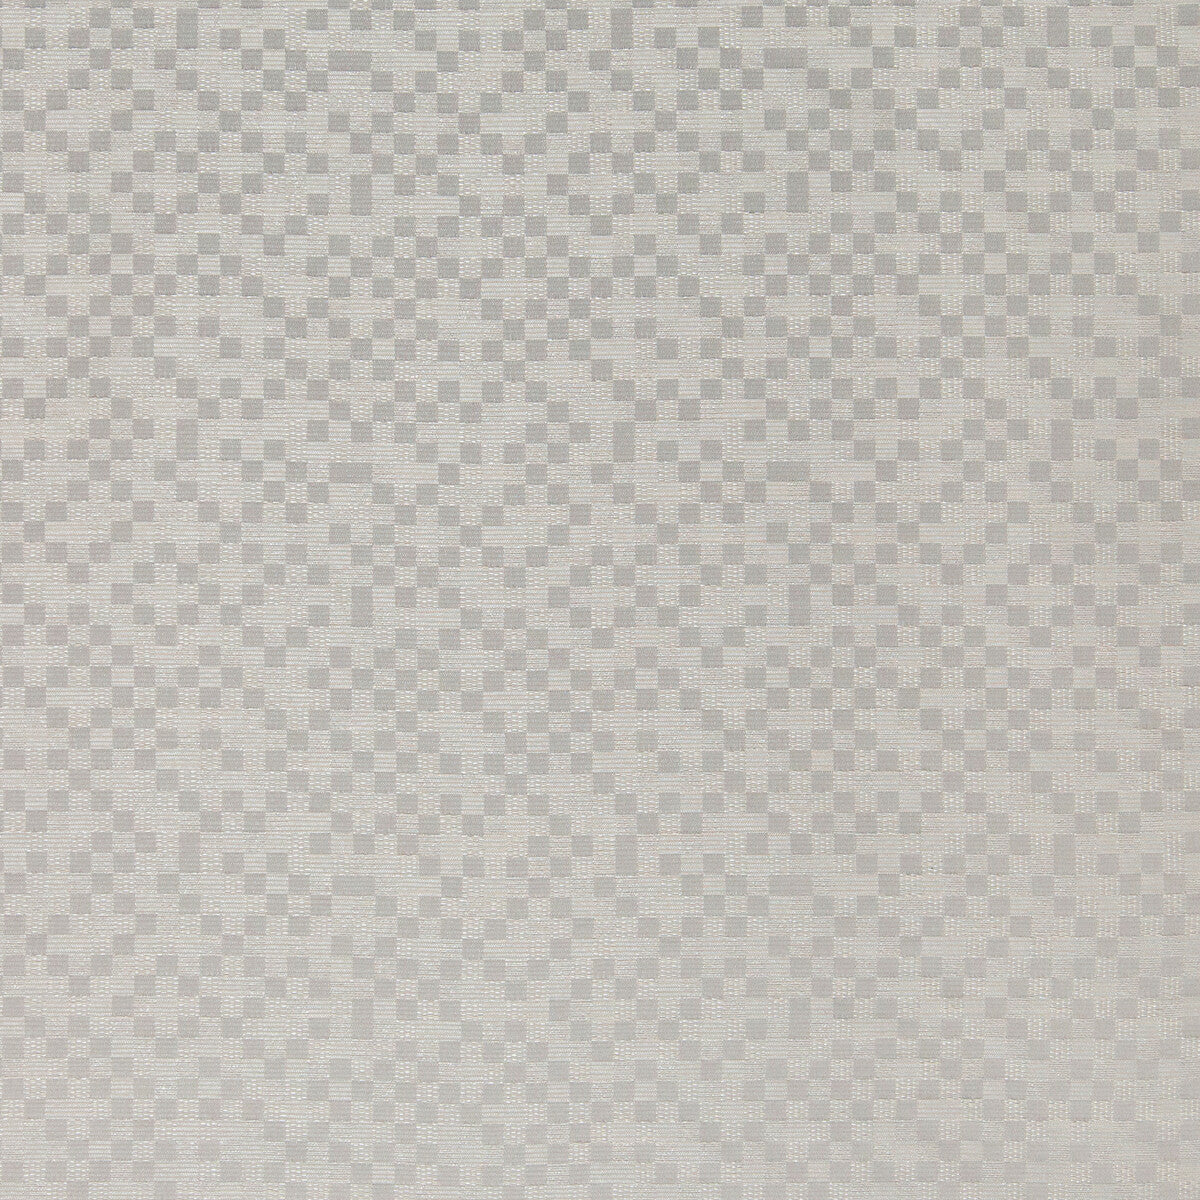 Levi fabric in pearl color - pattern 4658.11.0 - by Kravet Contract